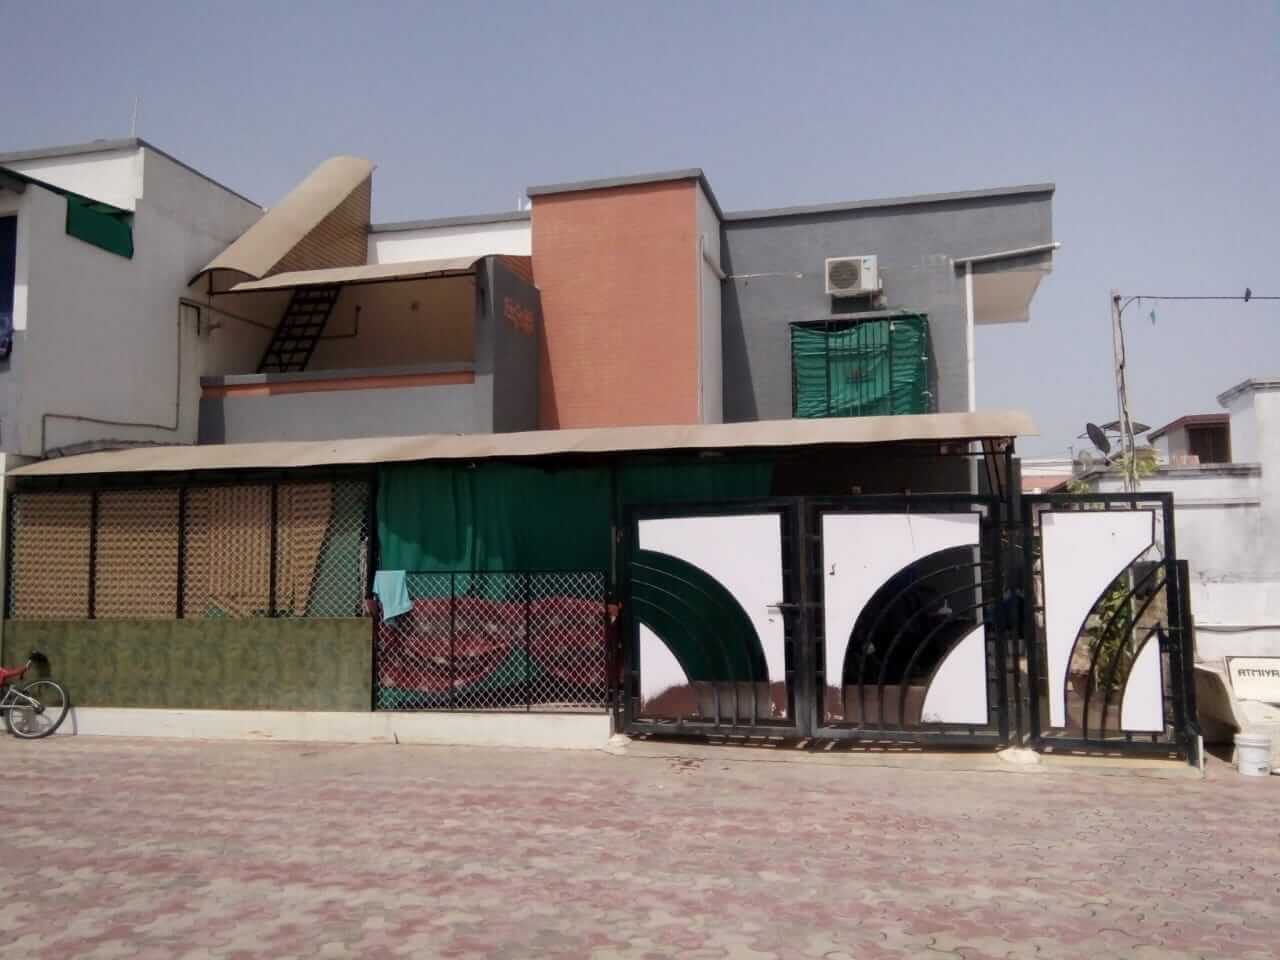 3 BHK House for Sell Near Bakrol, Ananad 388315 for 52,00,000 Rs. Negotiable